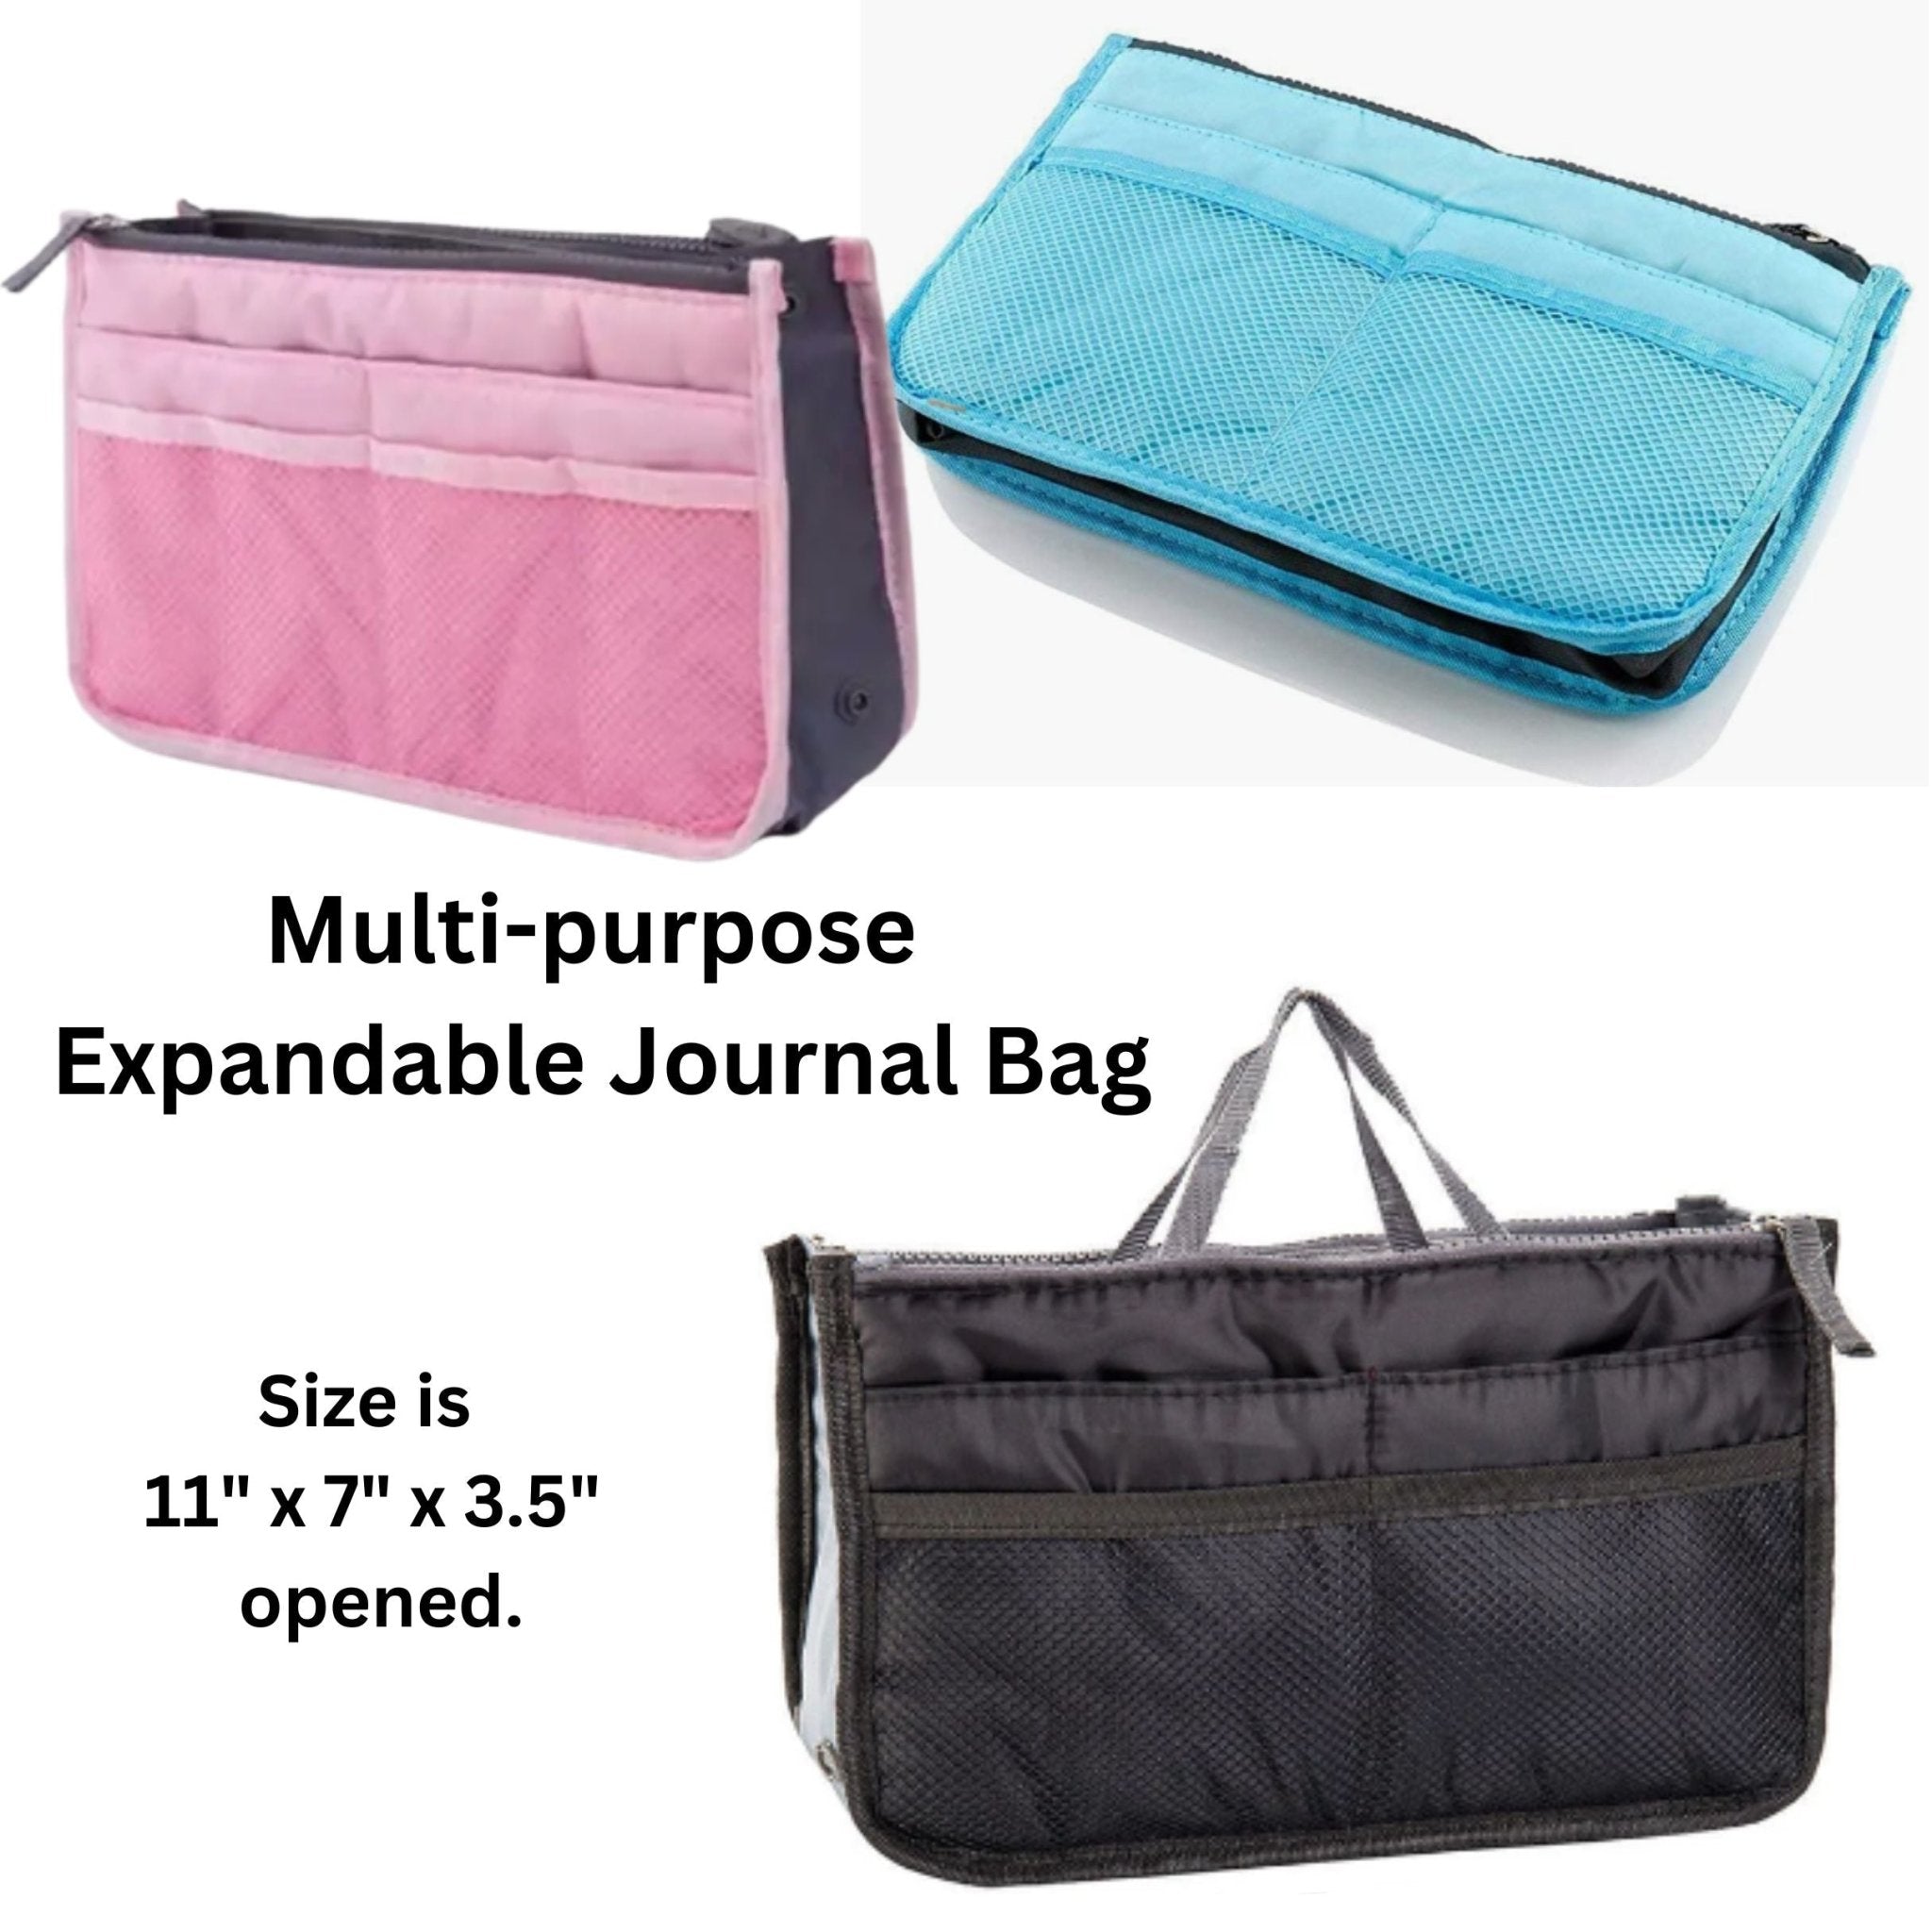 Would You Purchase the Same Bag in Multiple Sizes? - PurseBlog